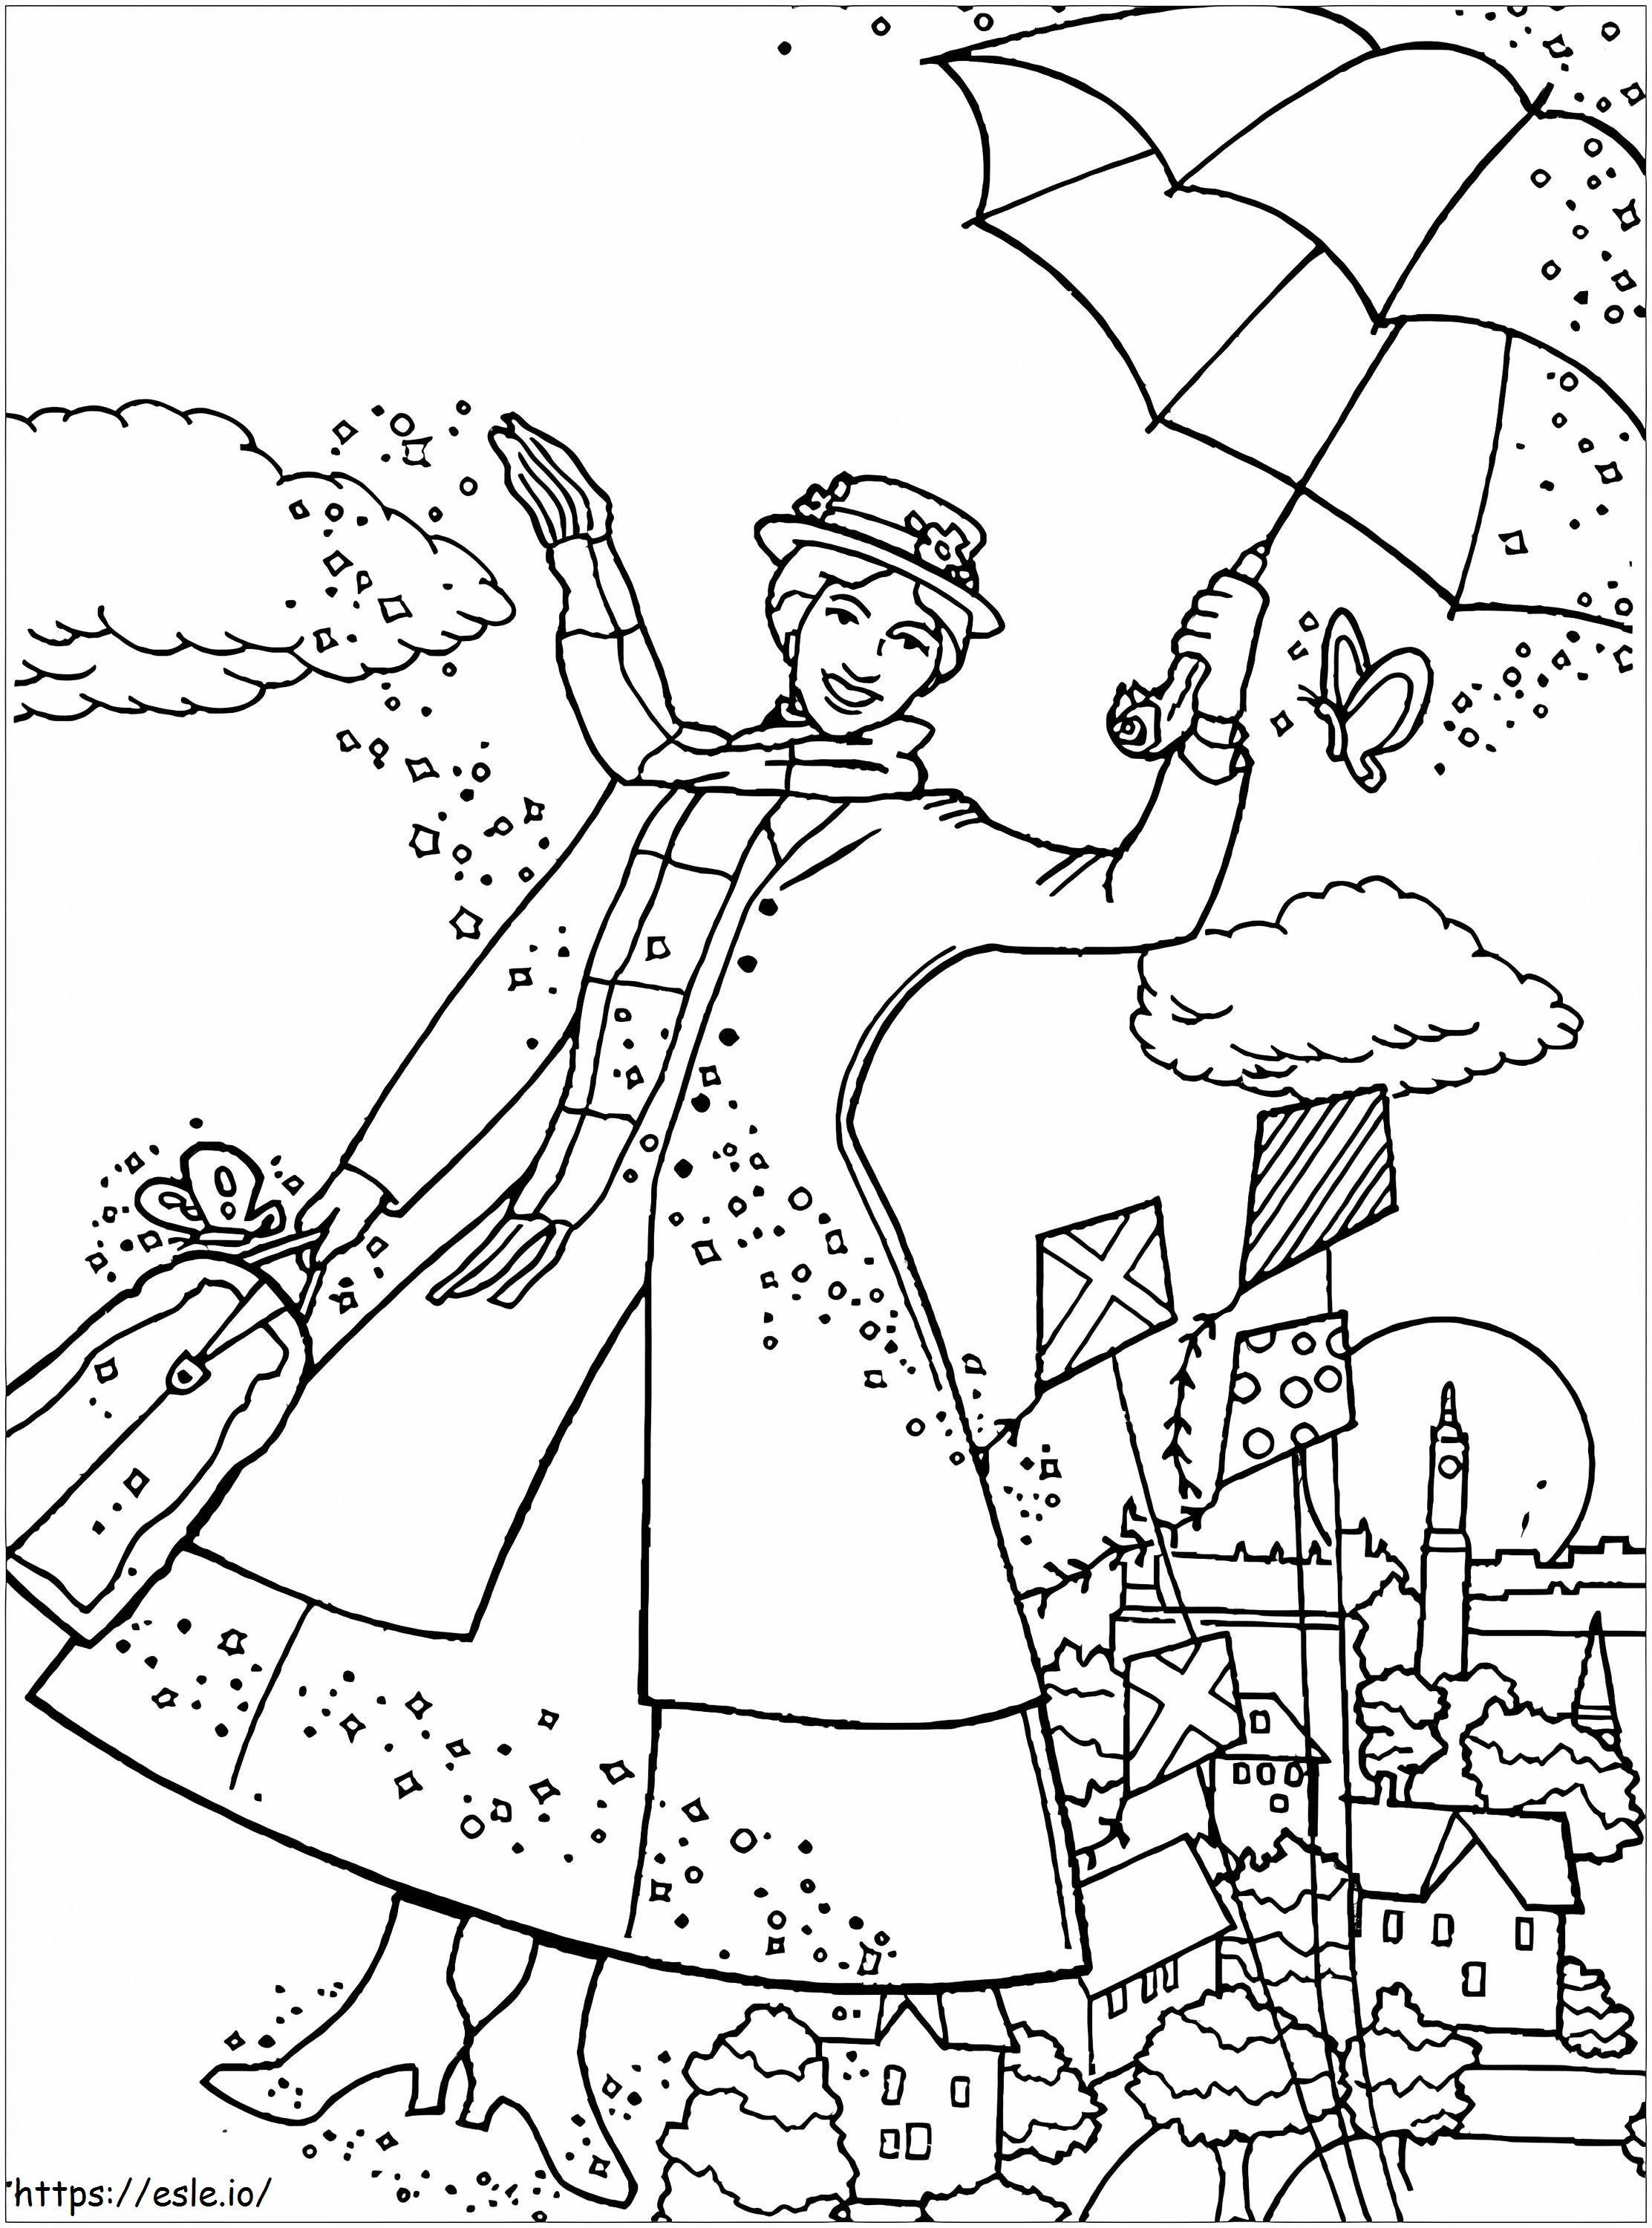 Coloriage Mary Poppins simple à imprimer dessin